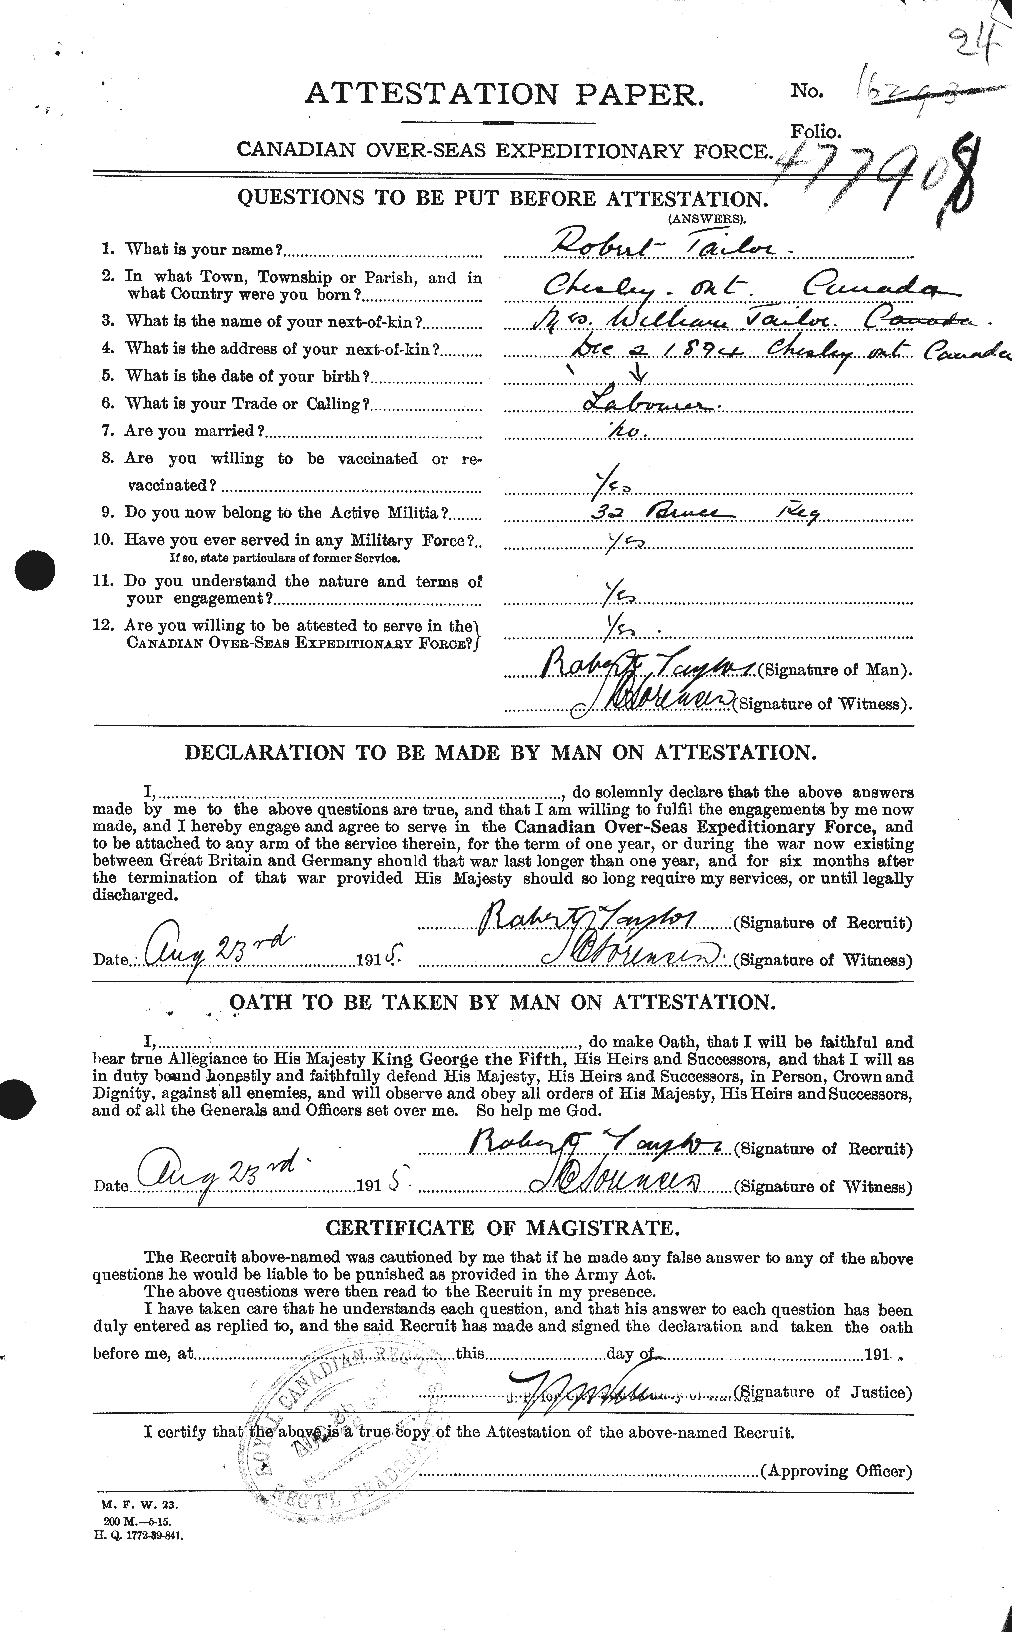 Personnel Records of the First World War - CEF 627447a